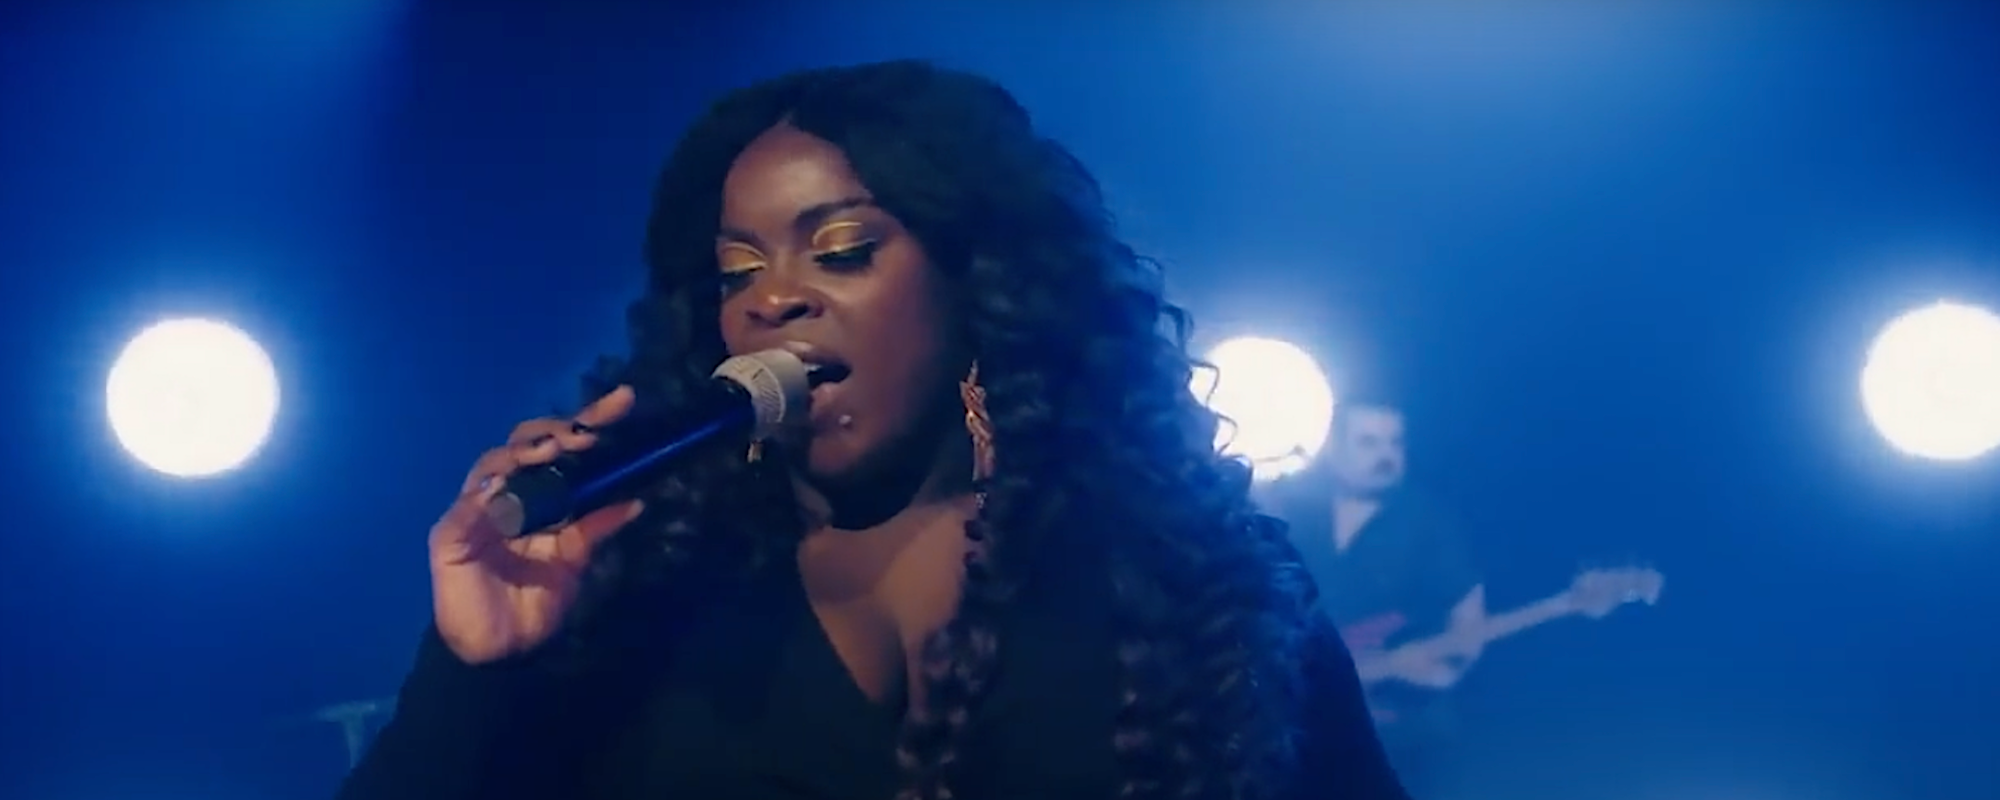 Yola Shares Soulful Rendition of “Dancing Away in Tears” on ‘Tonight Show’